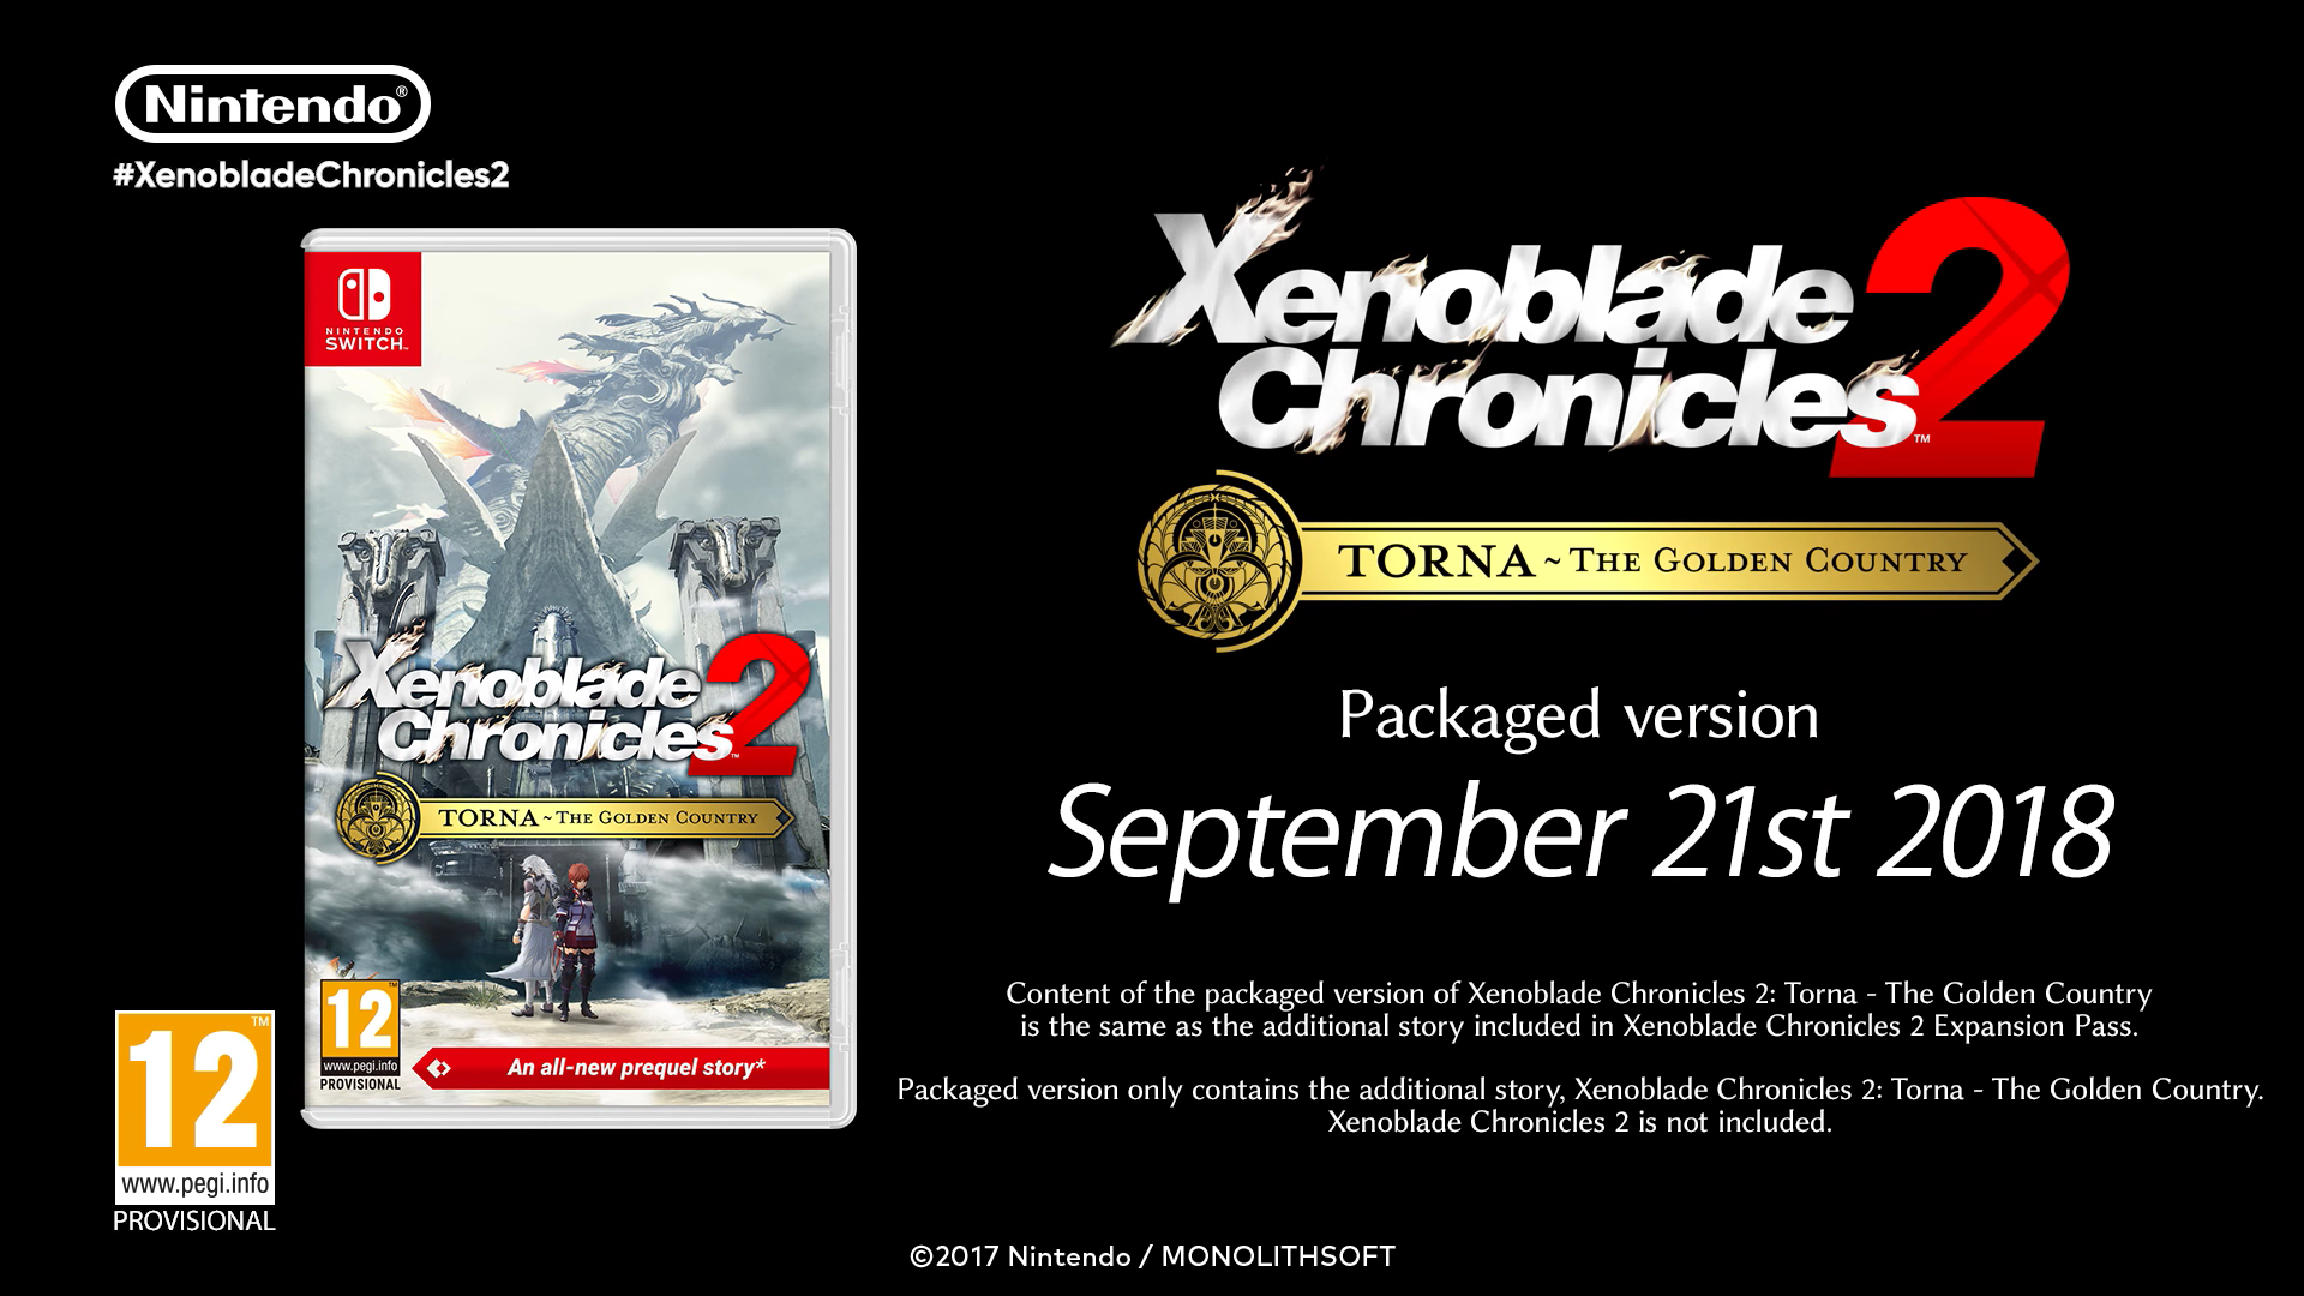 Xenoblade Chronicles 2: Torna - The Golden Country story DLC launches  September 14 | RPG Site